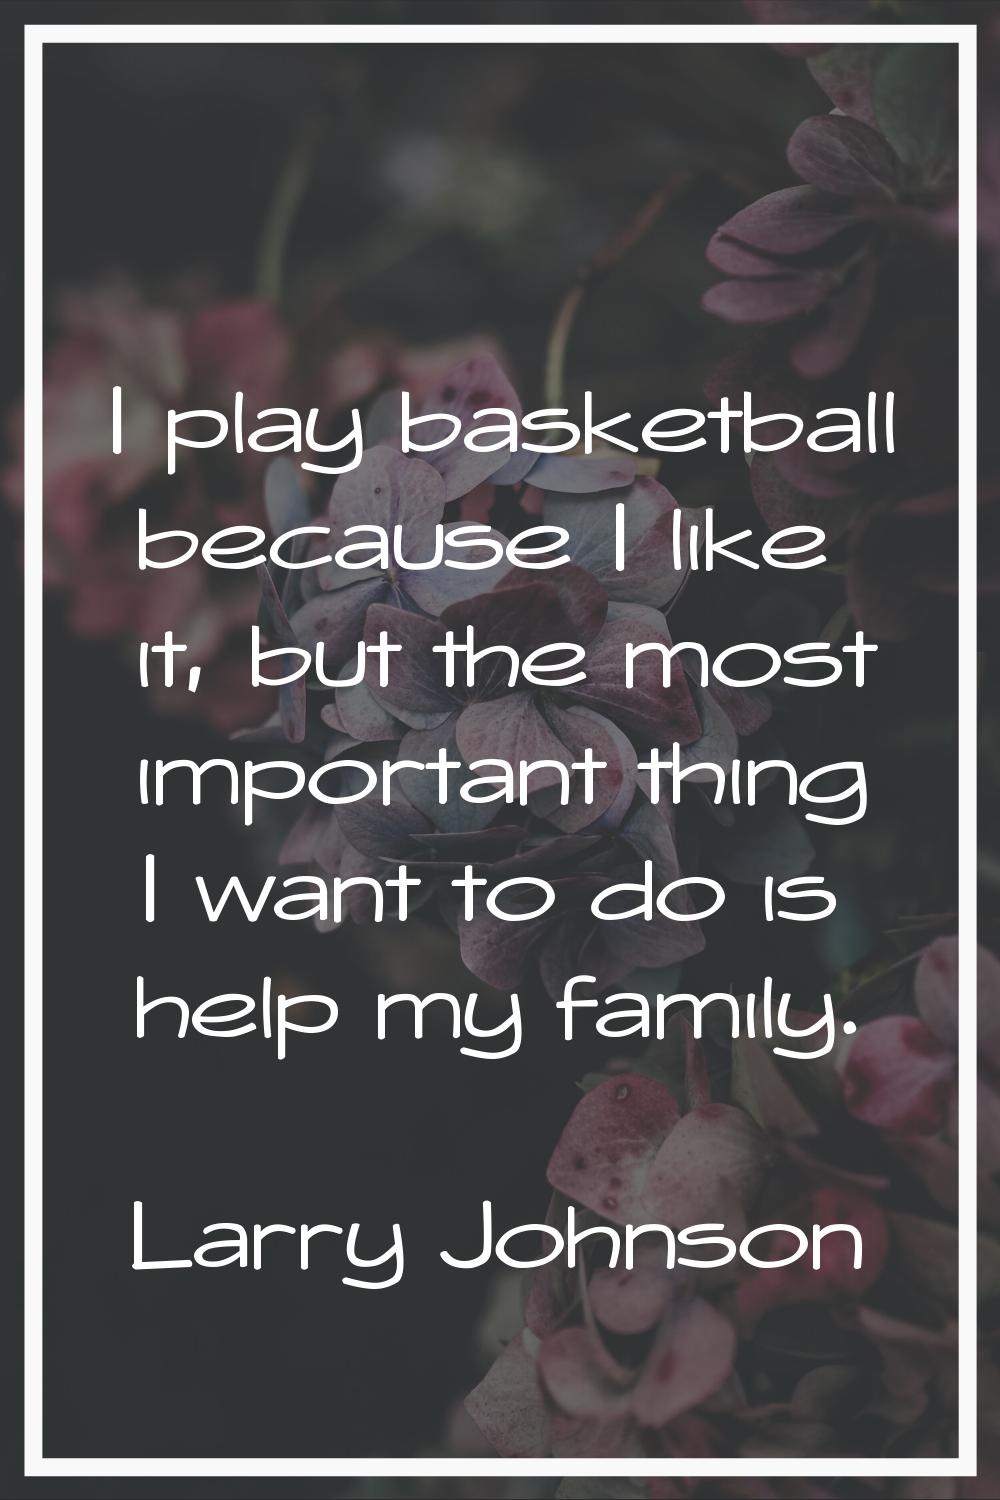 I play basketball because I like it, but the most important thing I want to do is help my family.